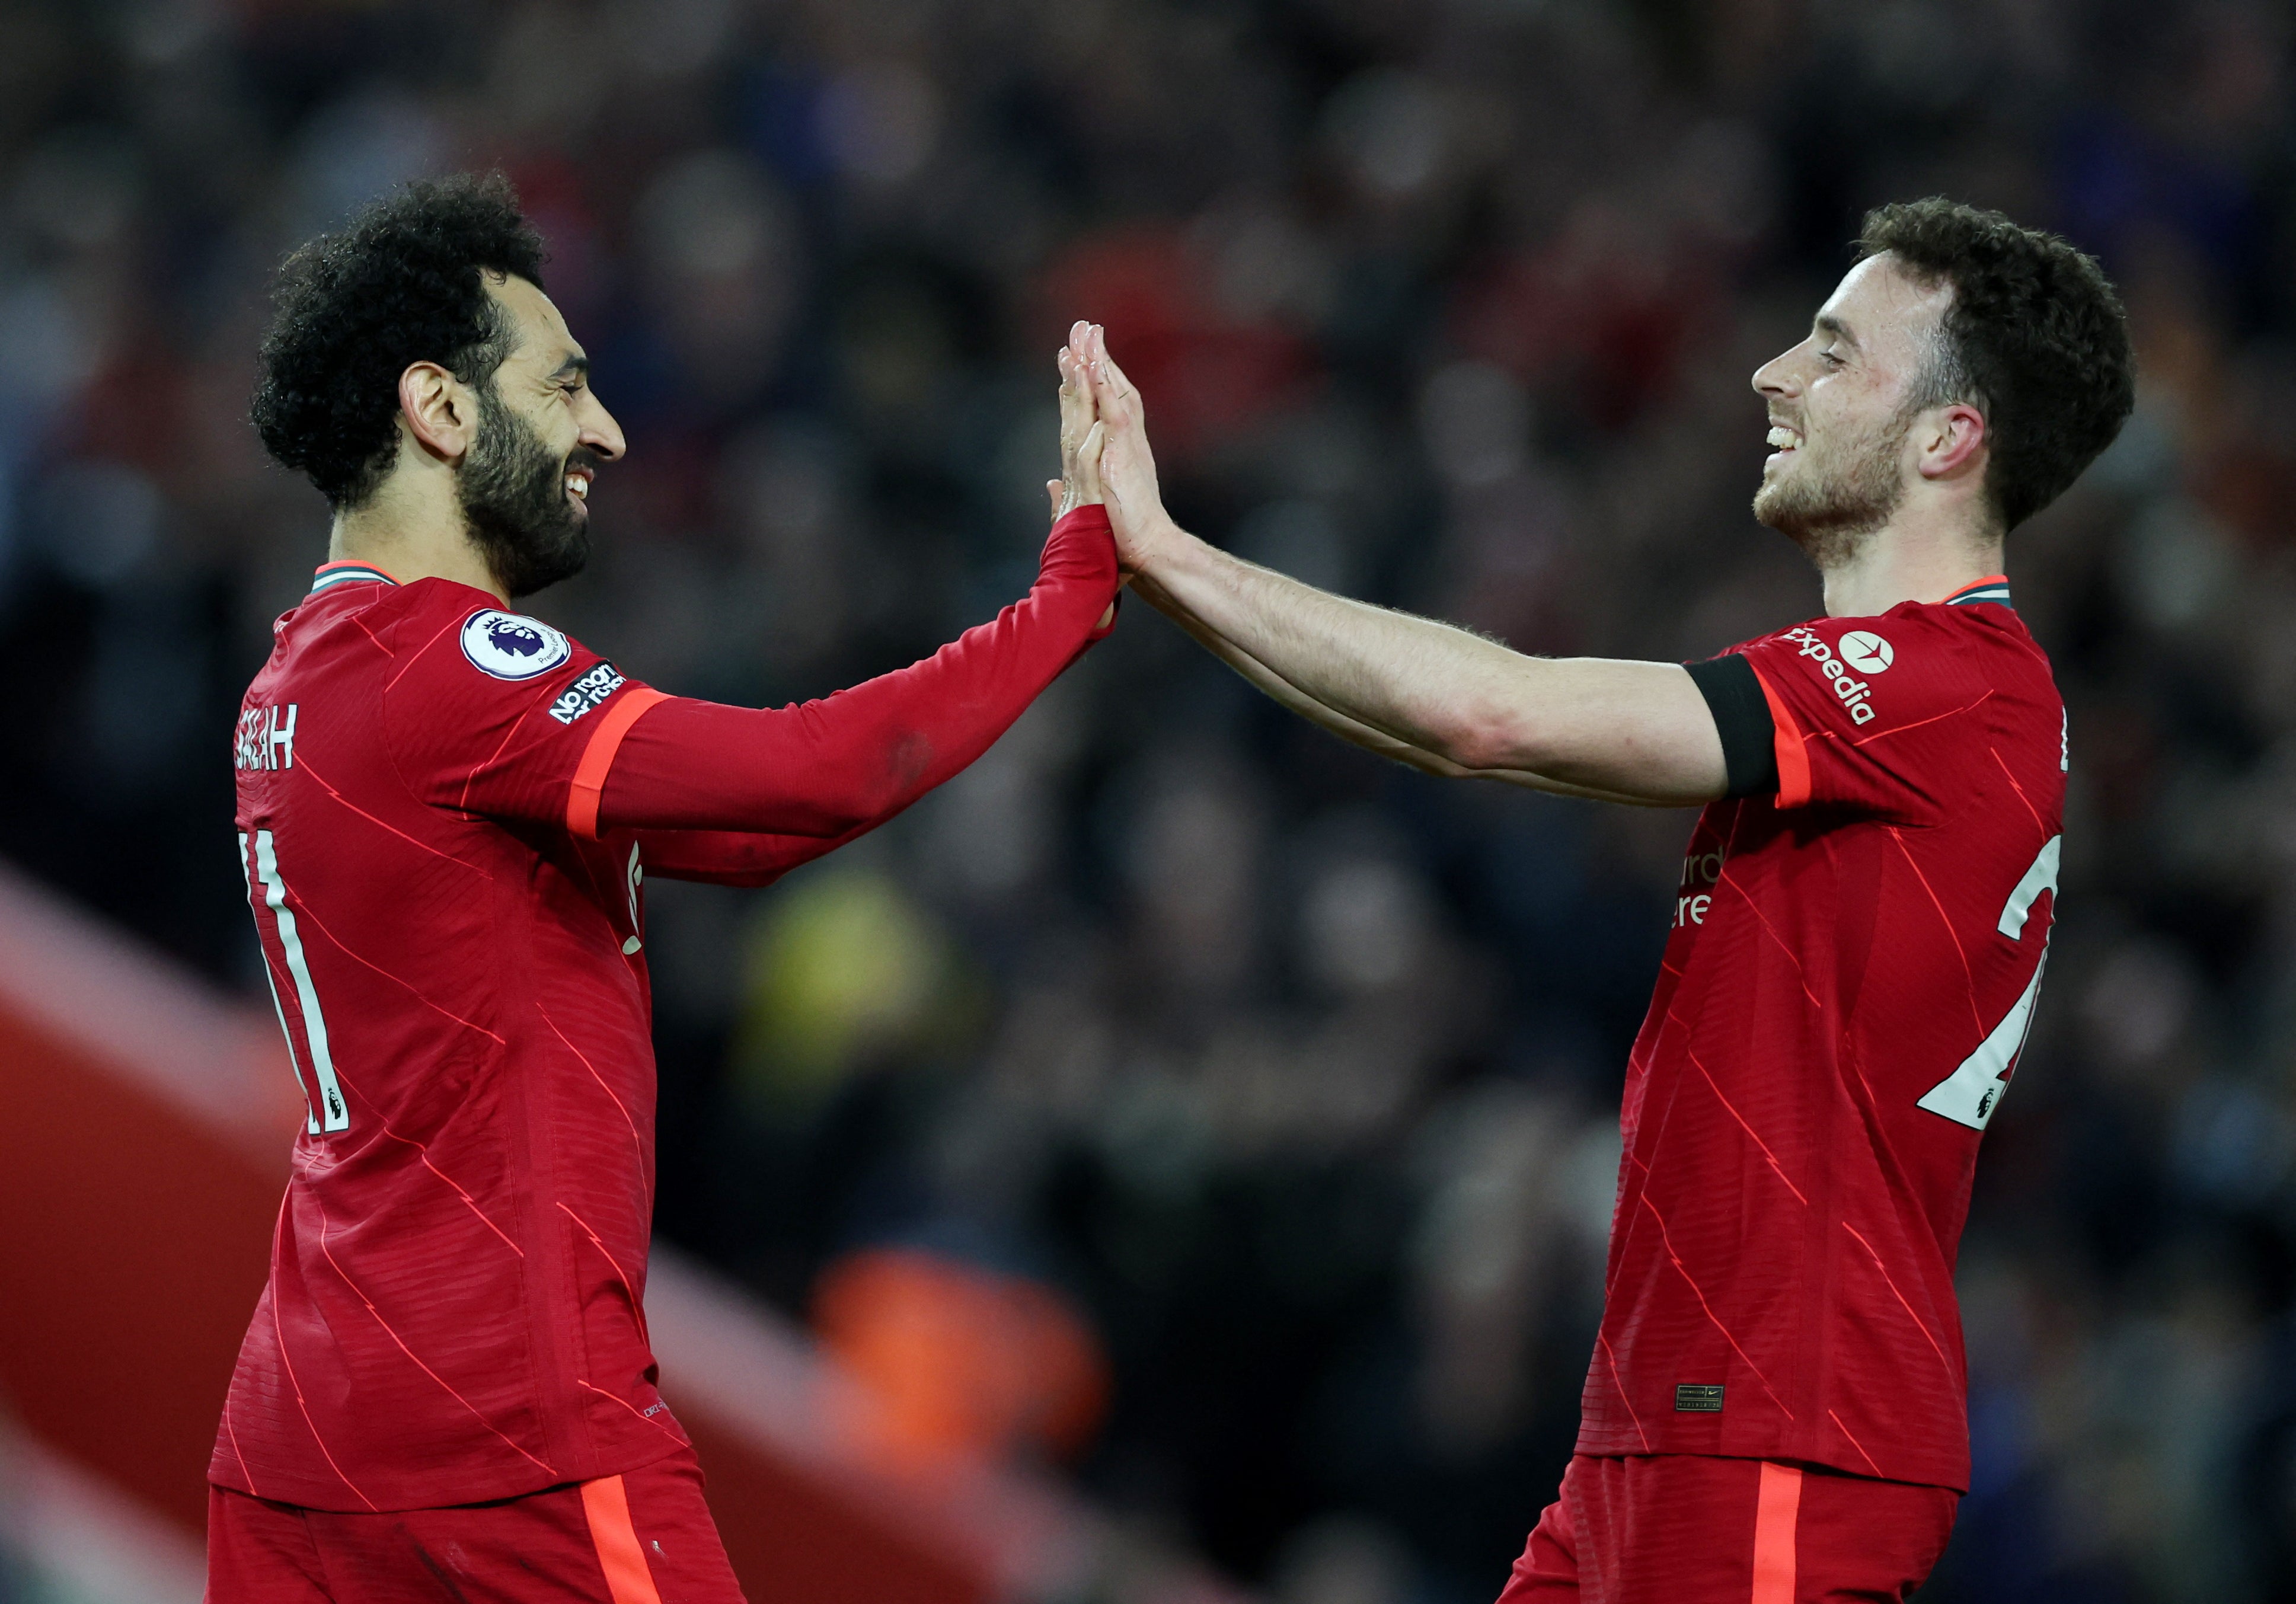 Mo Salah scored twice as Liverpool impressively beat their old rival to move back to the top of the Premier League